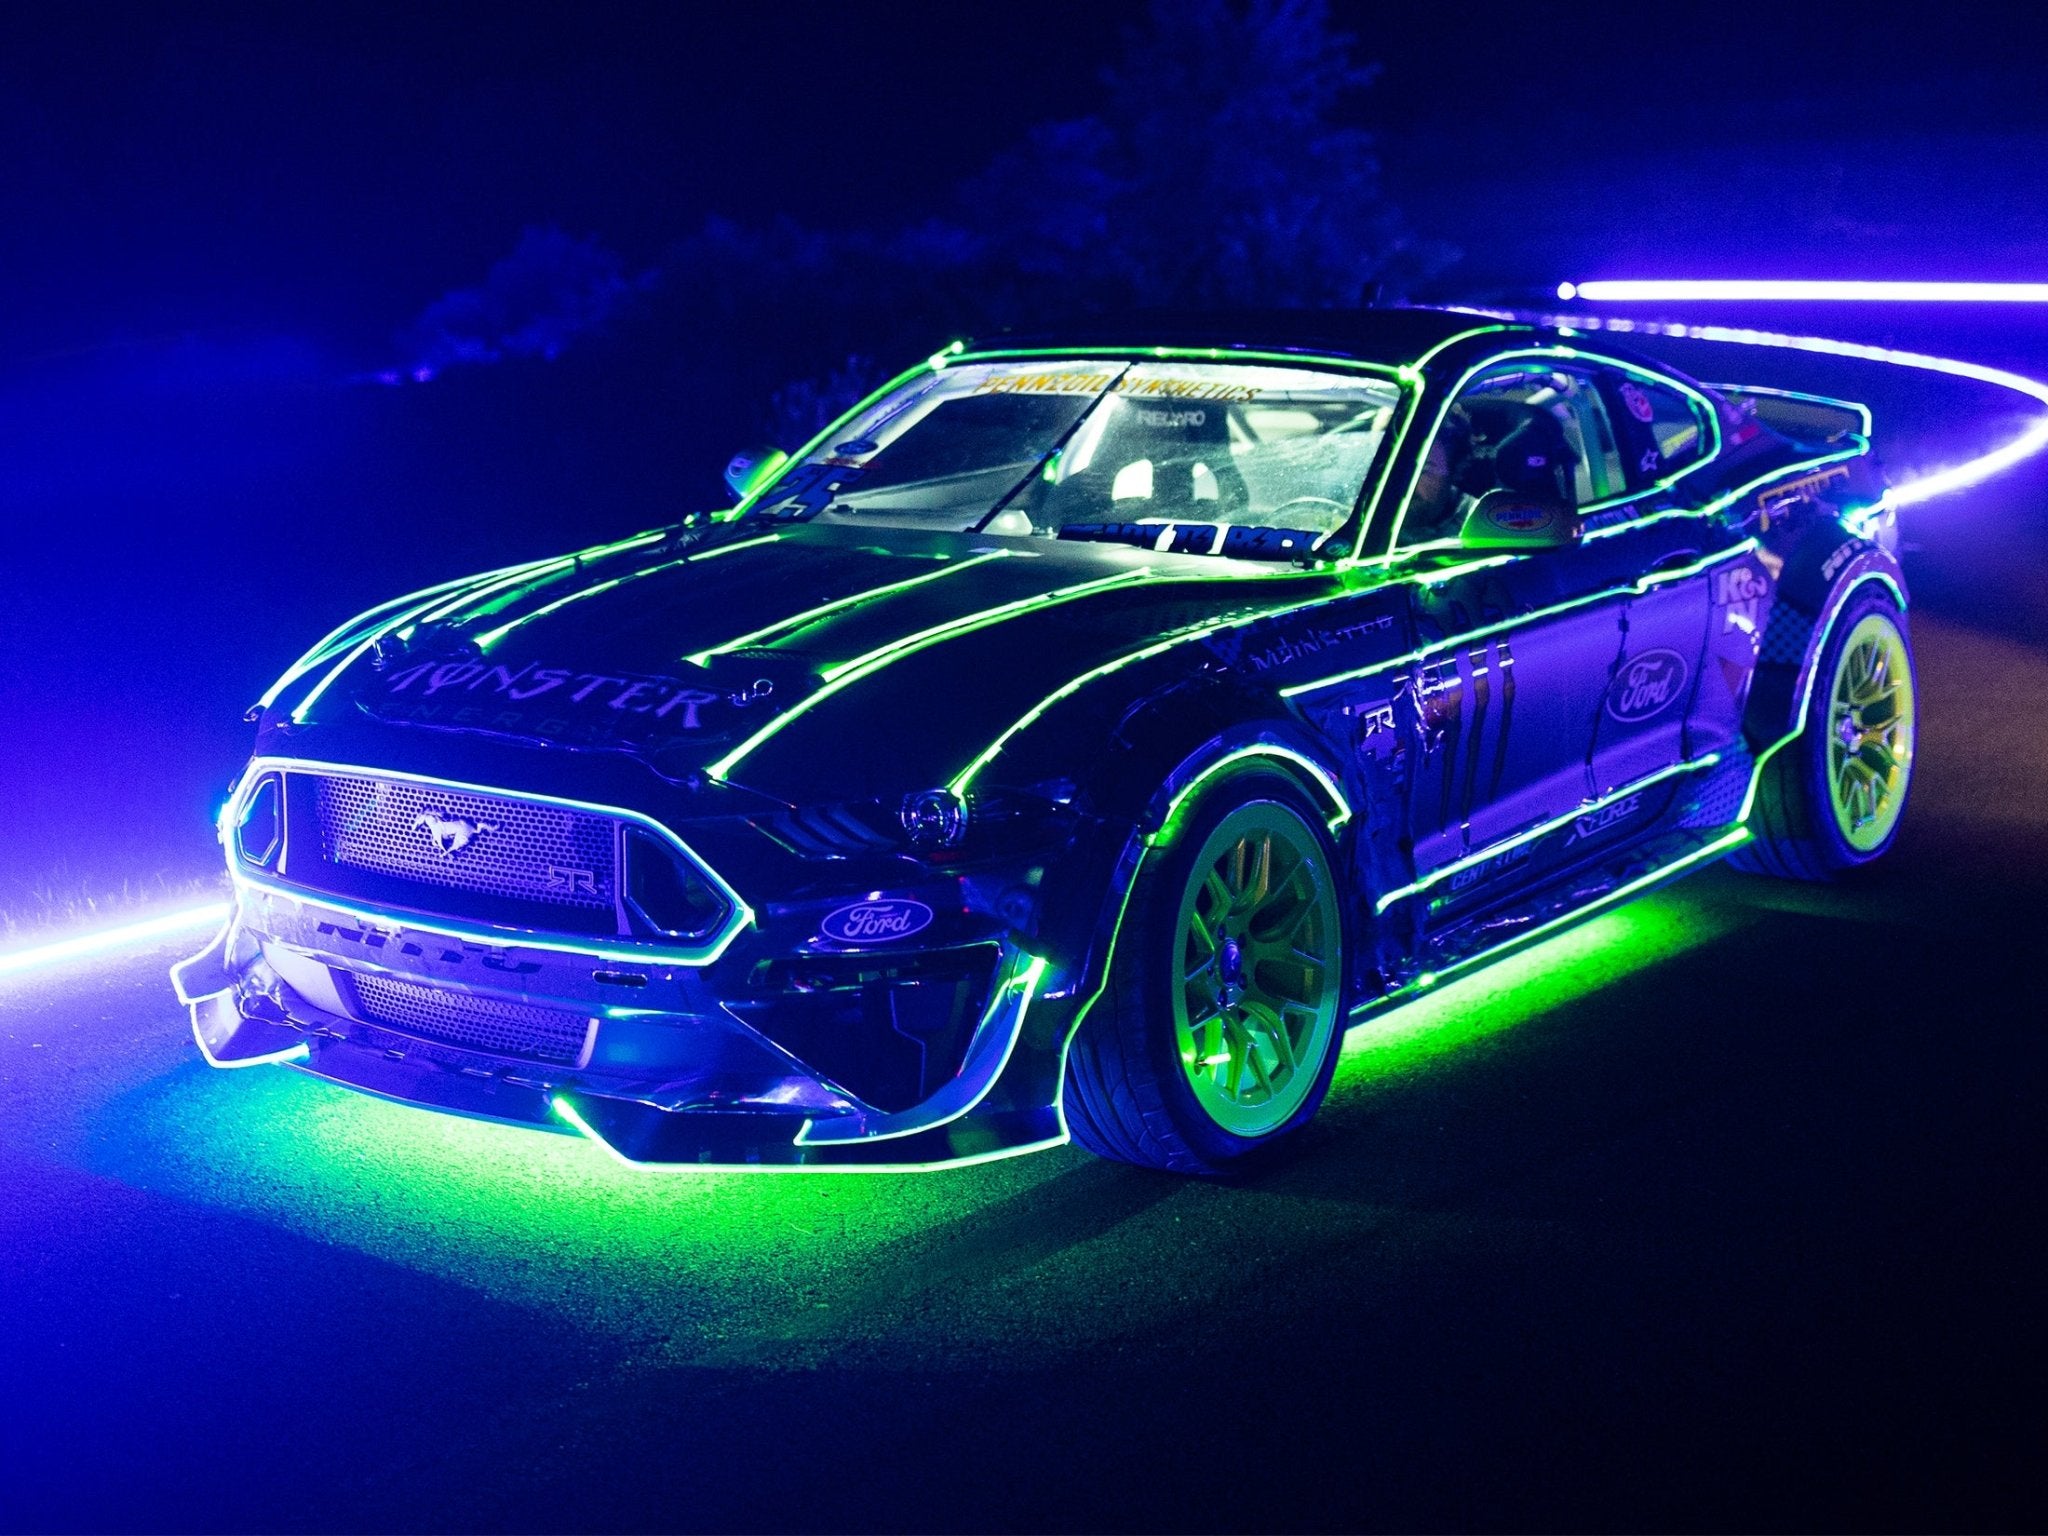 5 Ways to Customize Your Ride with LED Lights